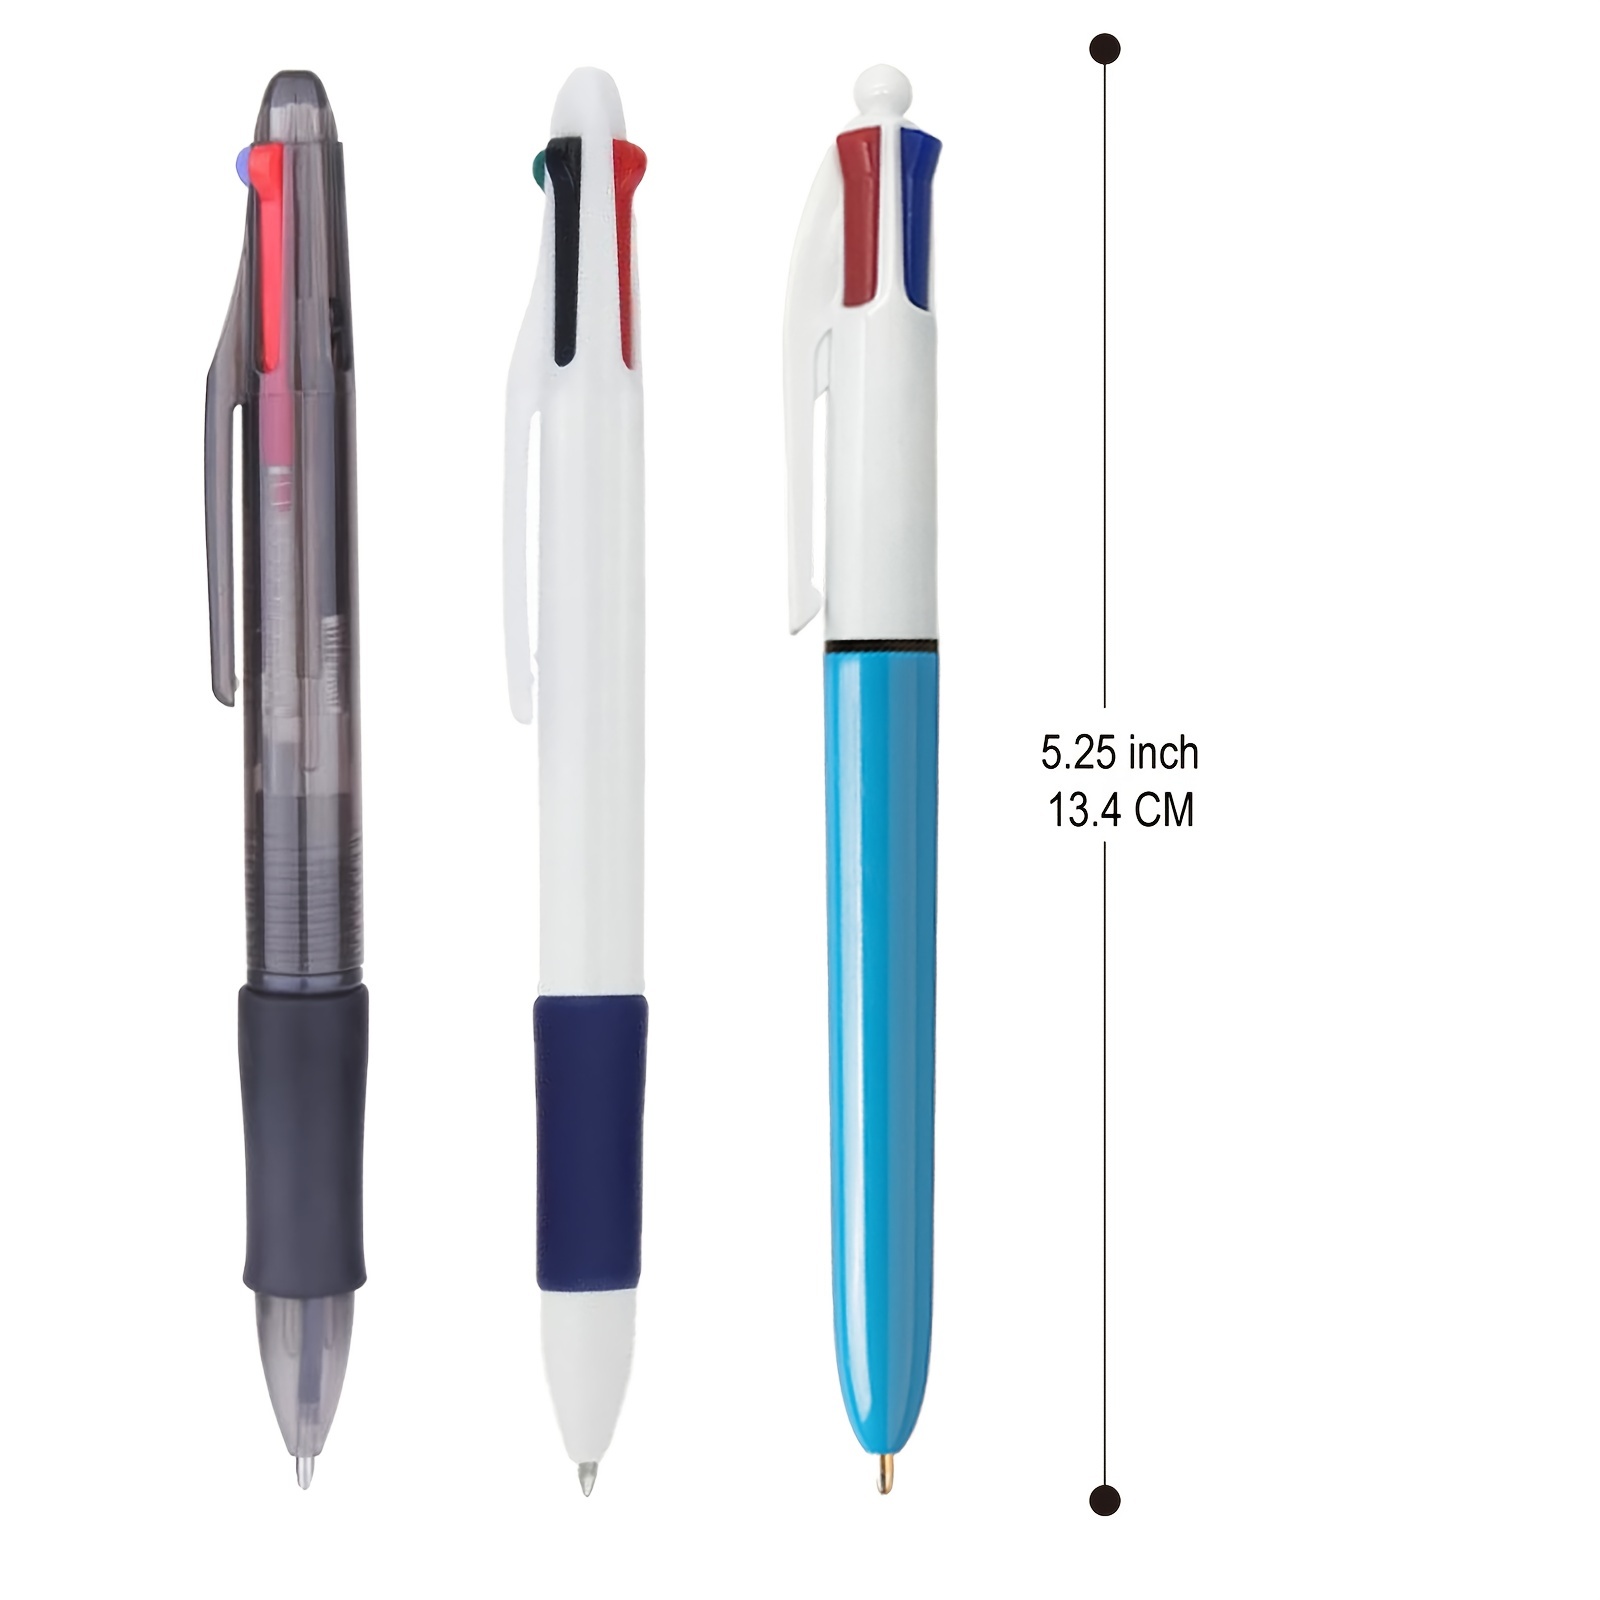 aisibeiger pen02 Multicolor Ball Point Pens 4-in-1 Colored Pens